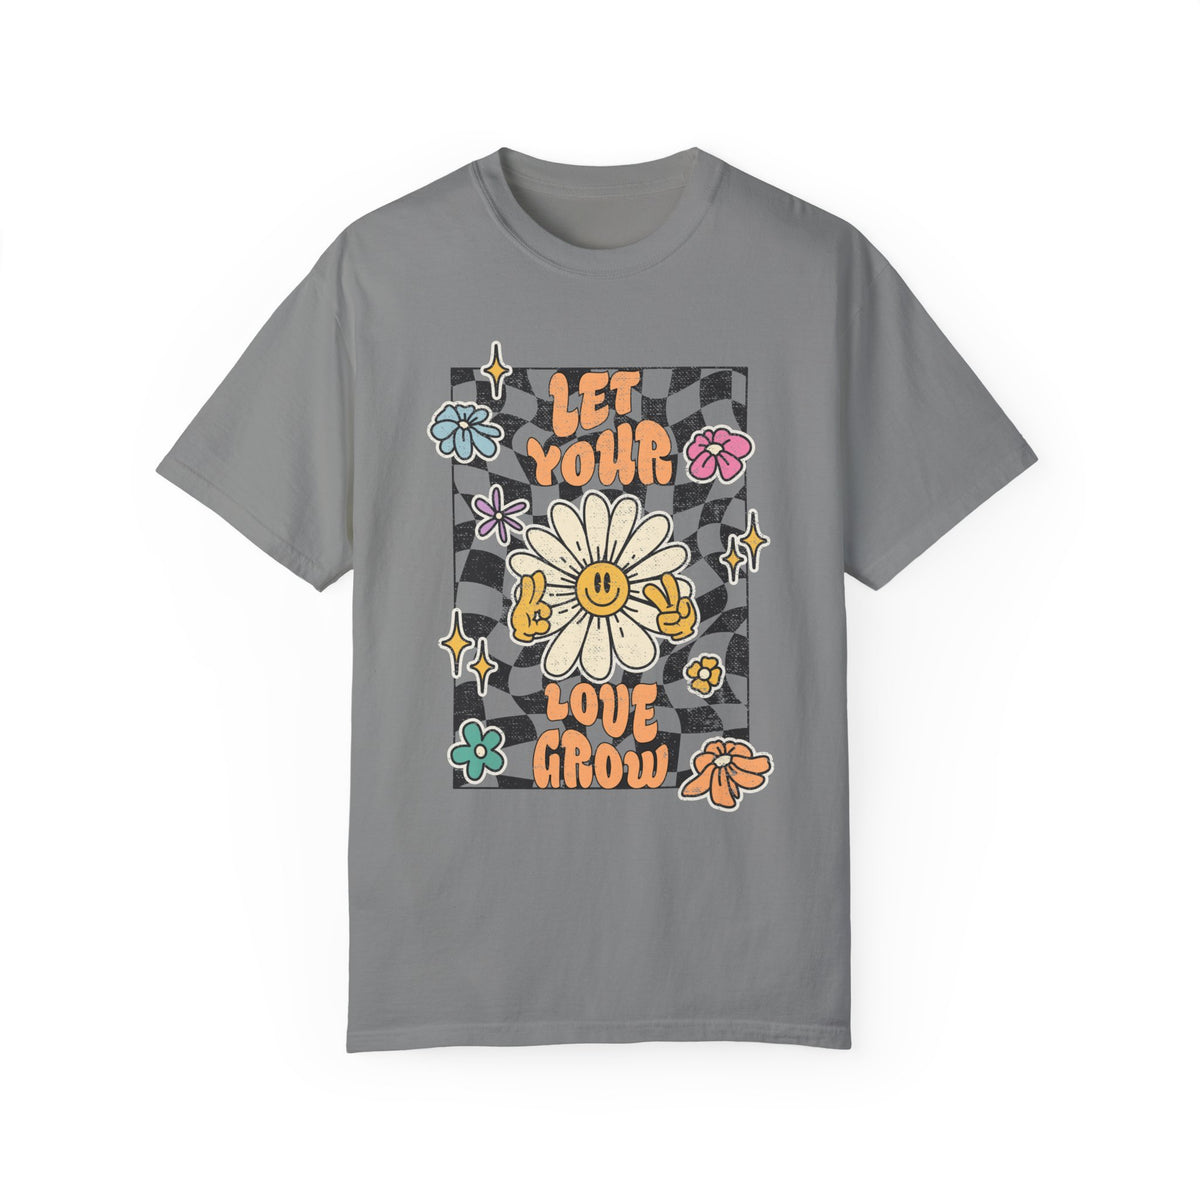 Vintage Women's Graphic T-Shirt | Let Your Love Grow Shirt | Retro Tee